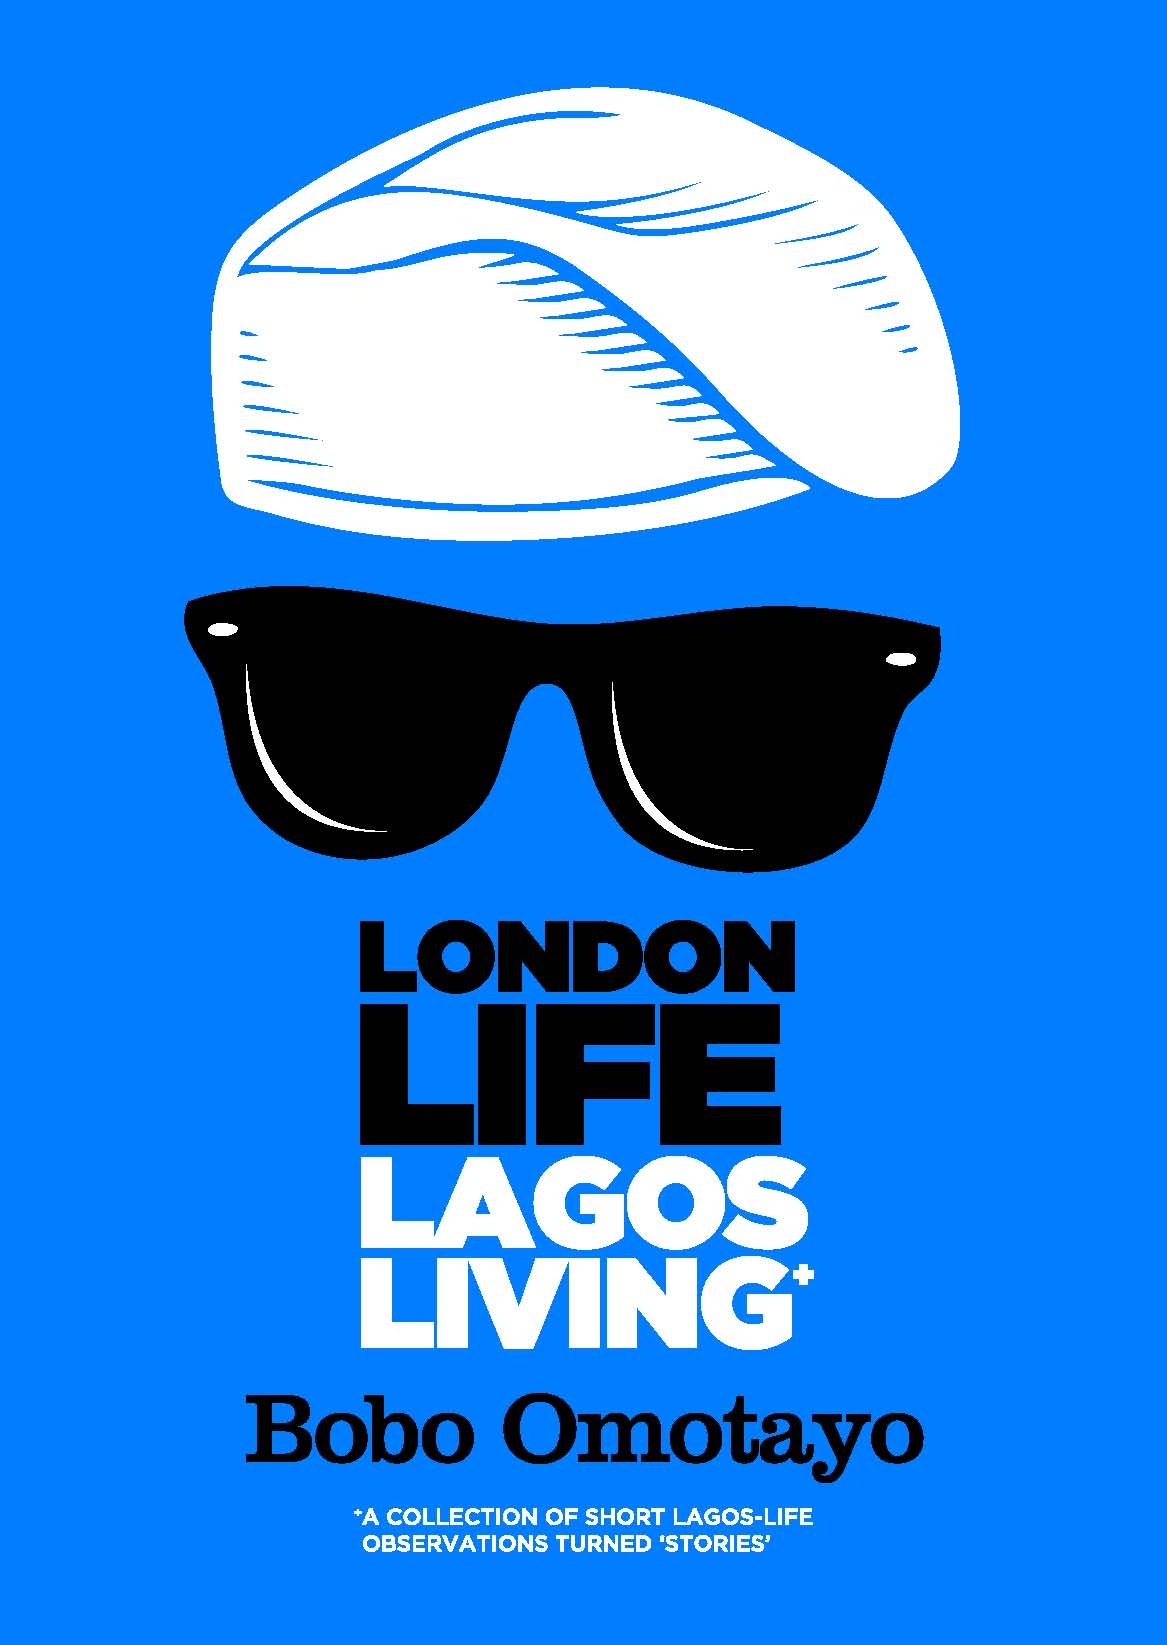 London Life, Lagos Living Documentary Official